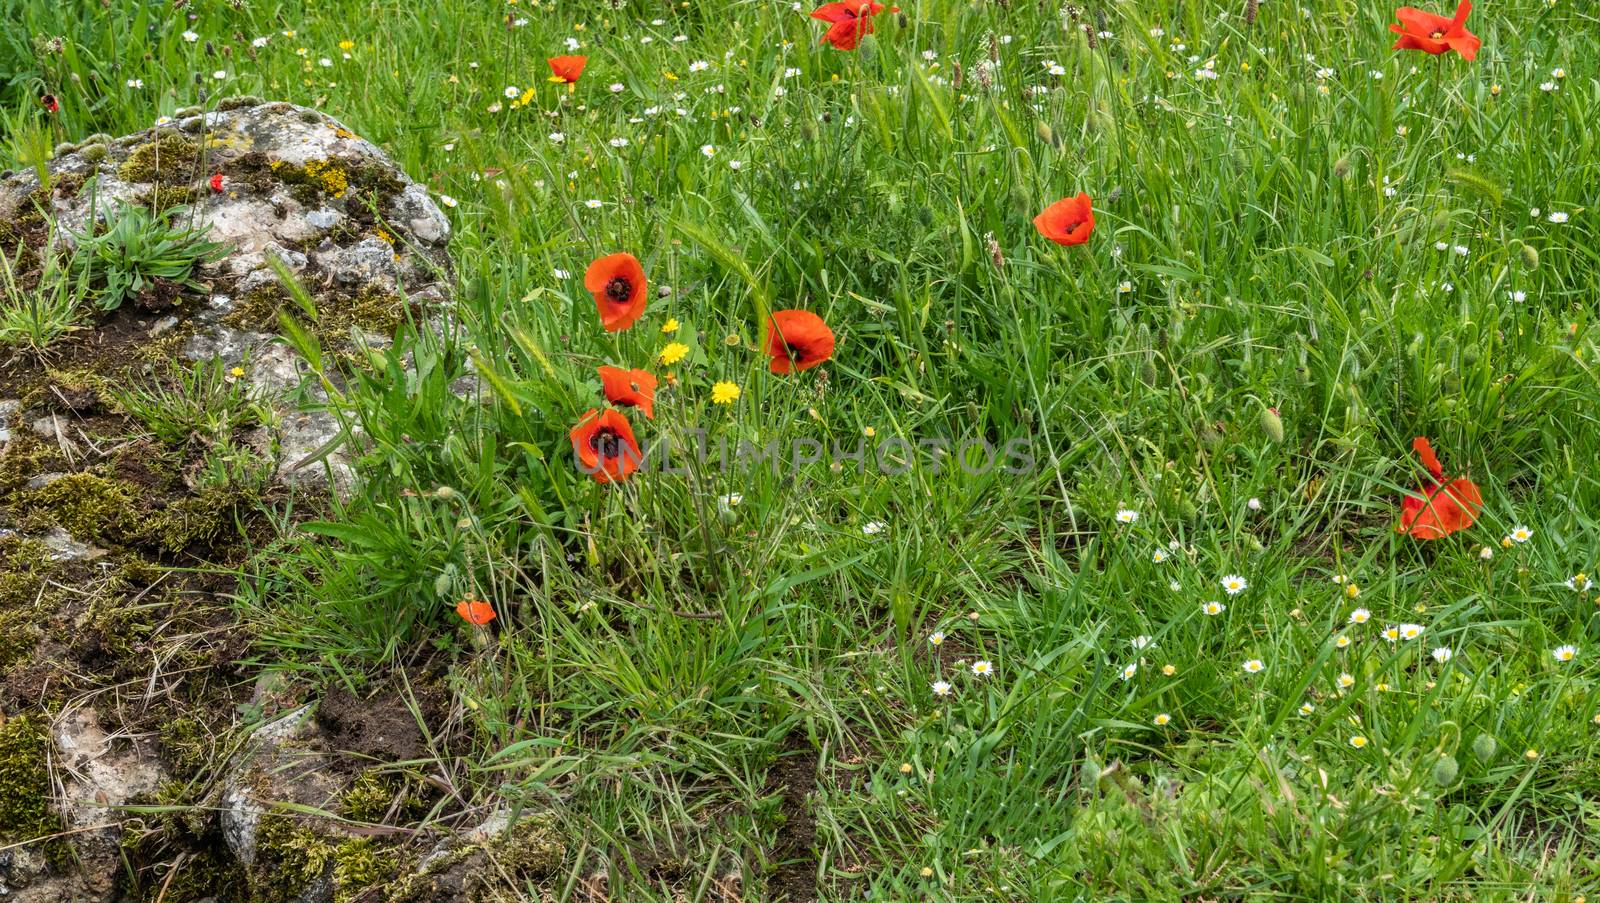 Diksmuide, Flanders, Belgium -  June 19, 2019: Historic WW1 Trenches, called Dodengang along IJzer River, shows gray-brown stone-hard sandbags, green grass, red poppies.